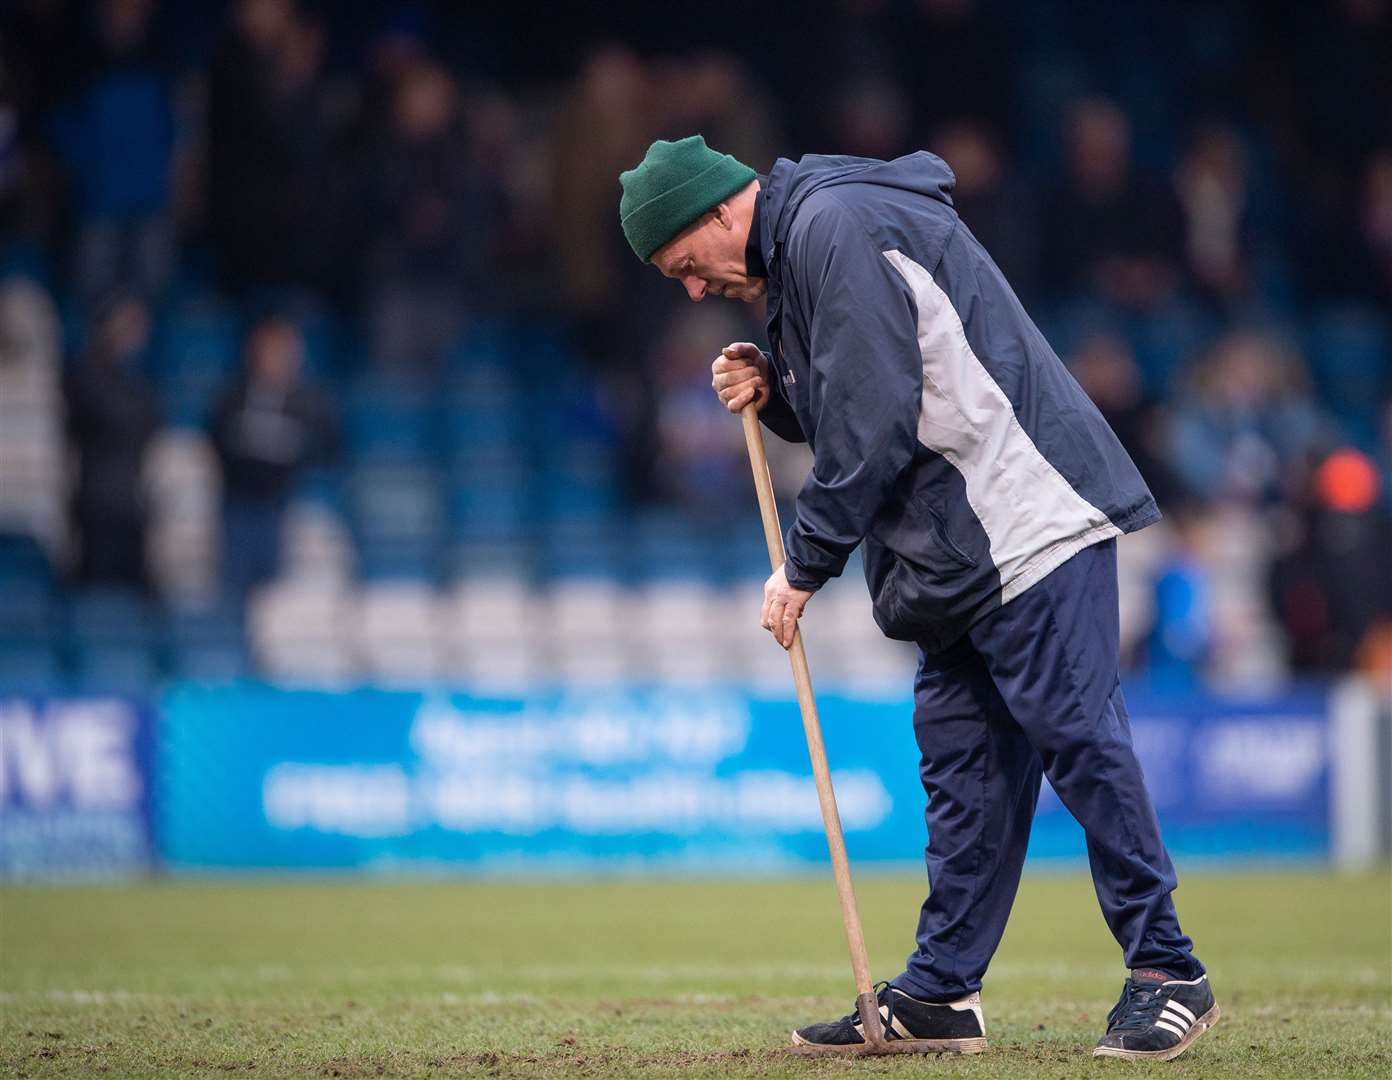 Gillingham spend close to half a million pounds putting down a new pitch recently